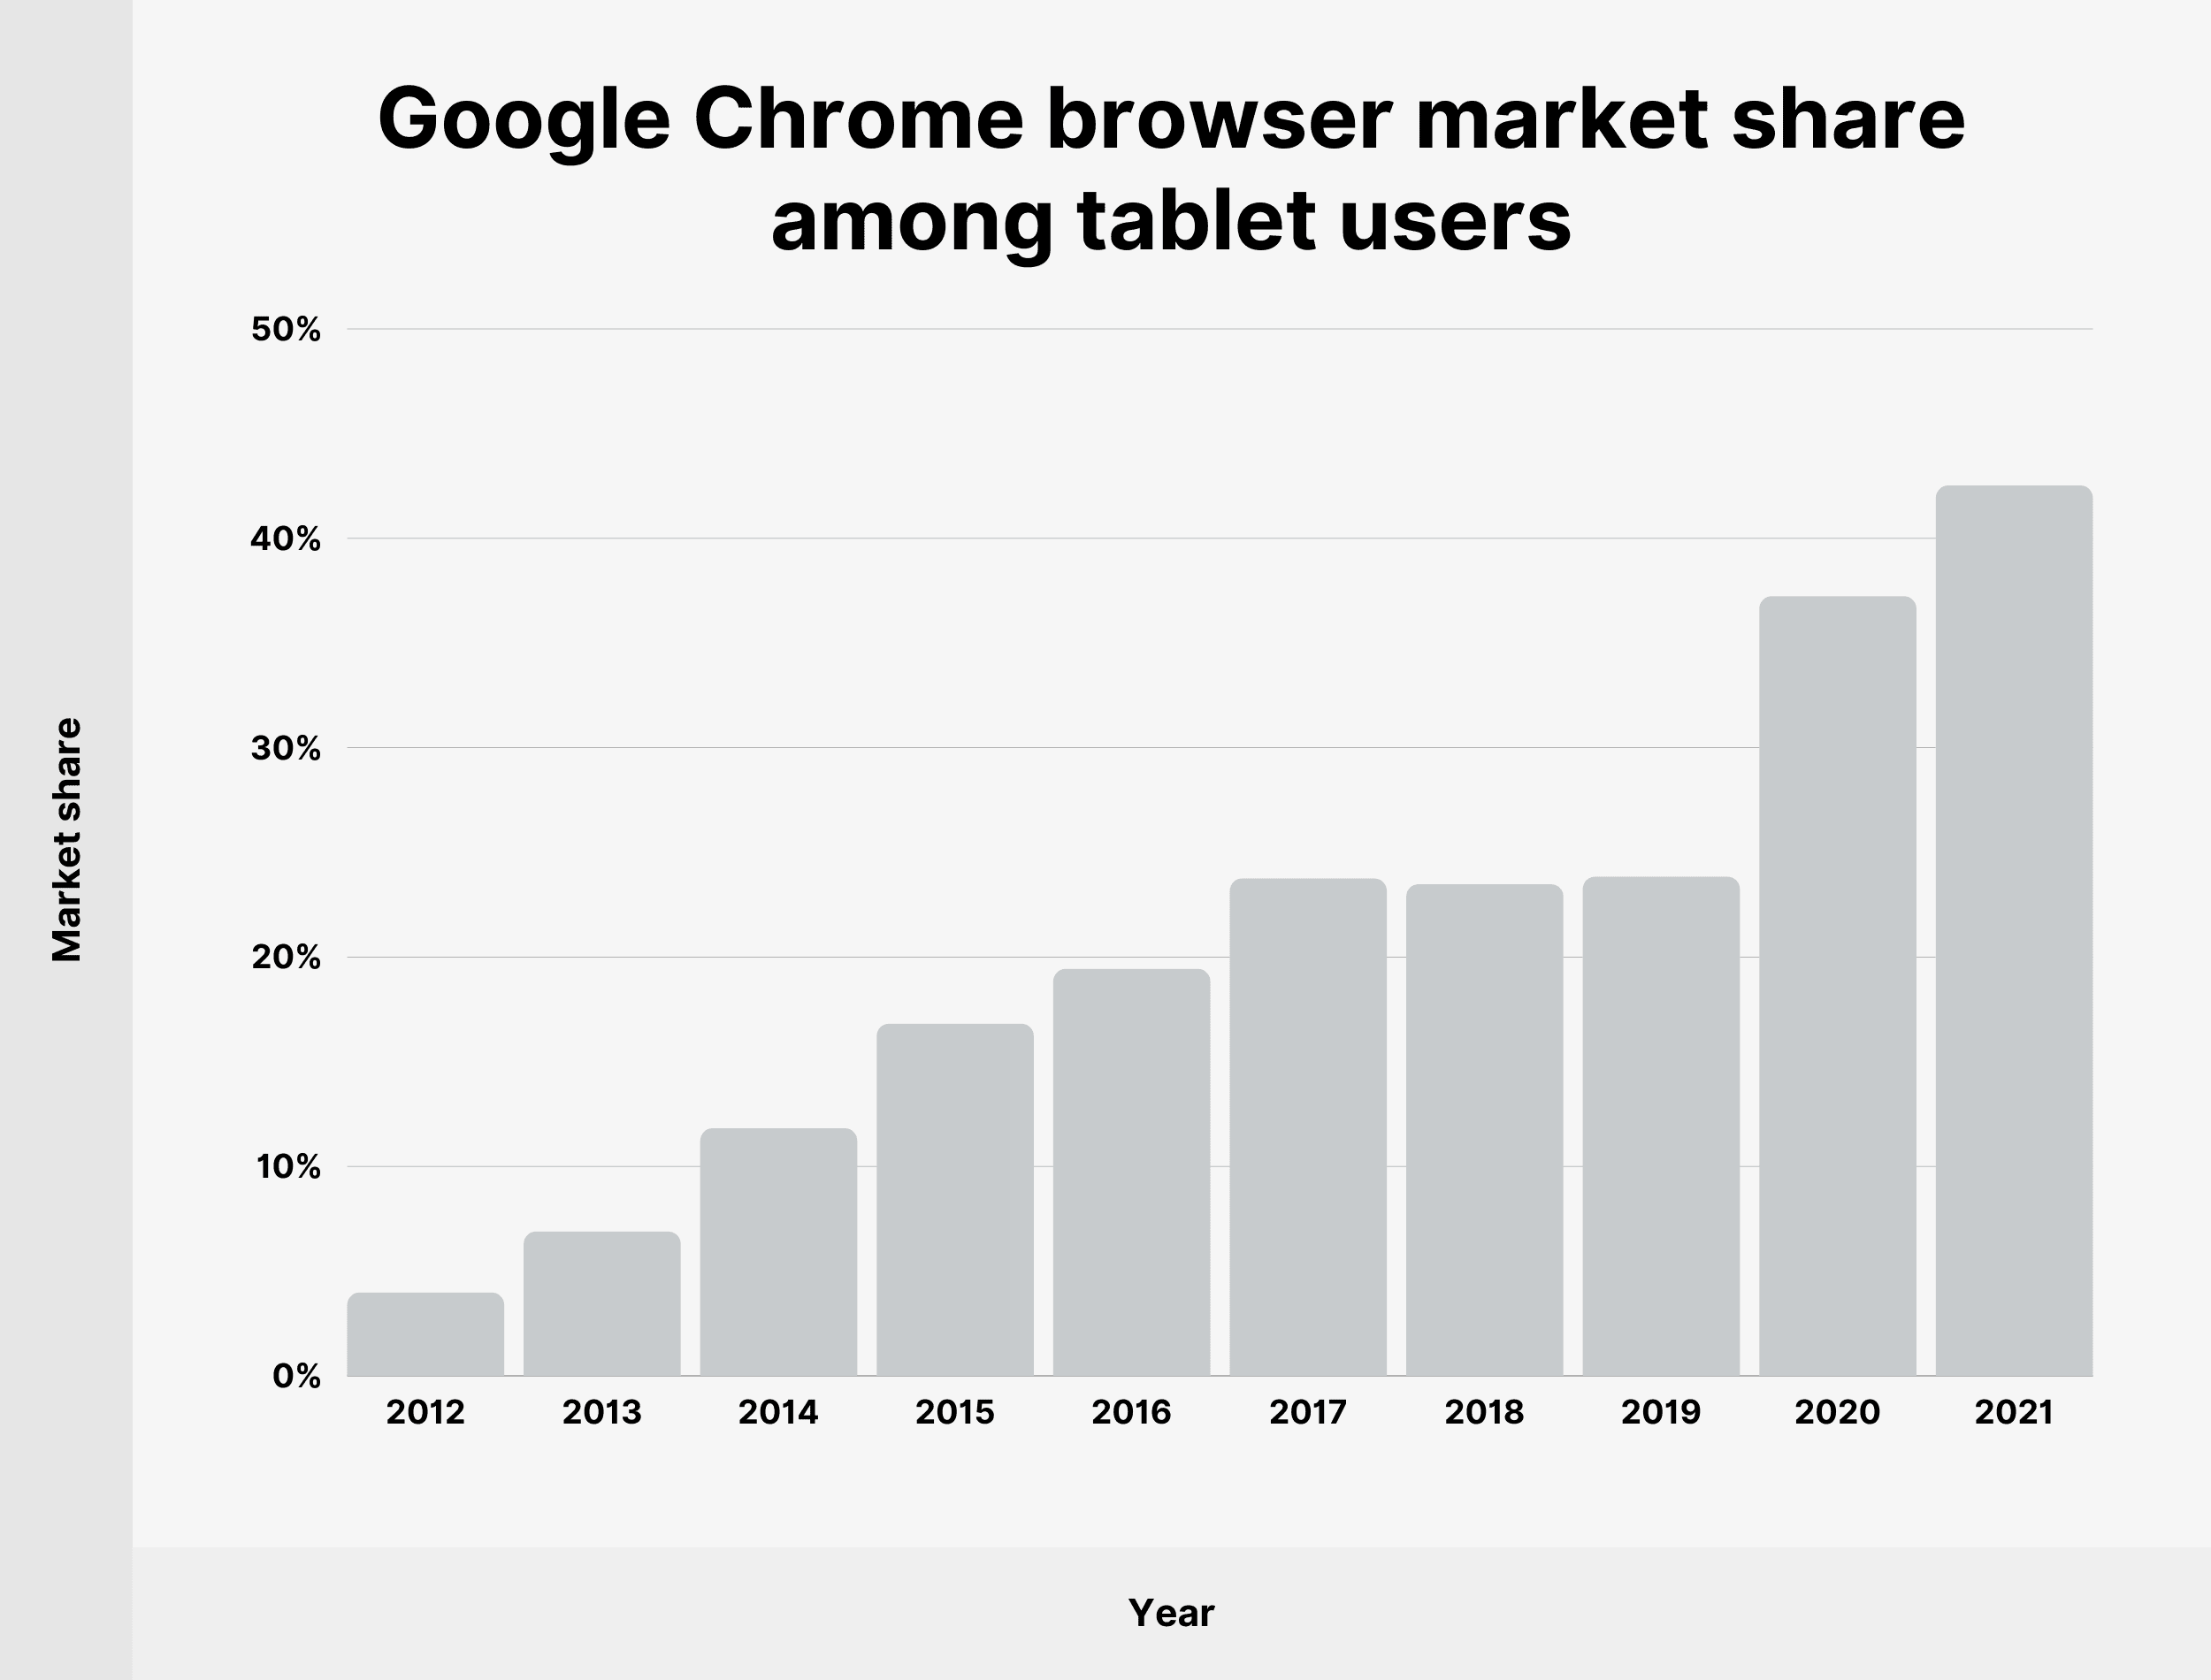 Google Chrome browser market share among tablet users